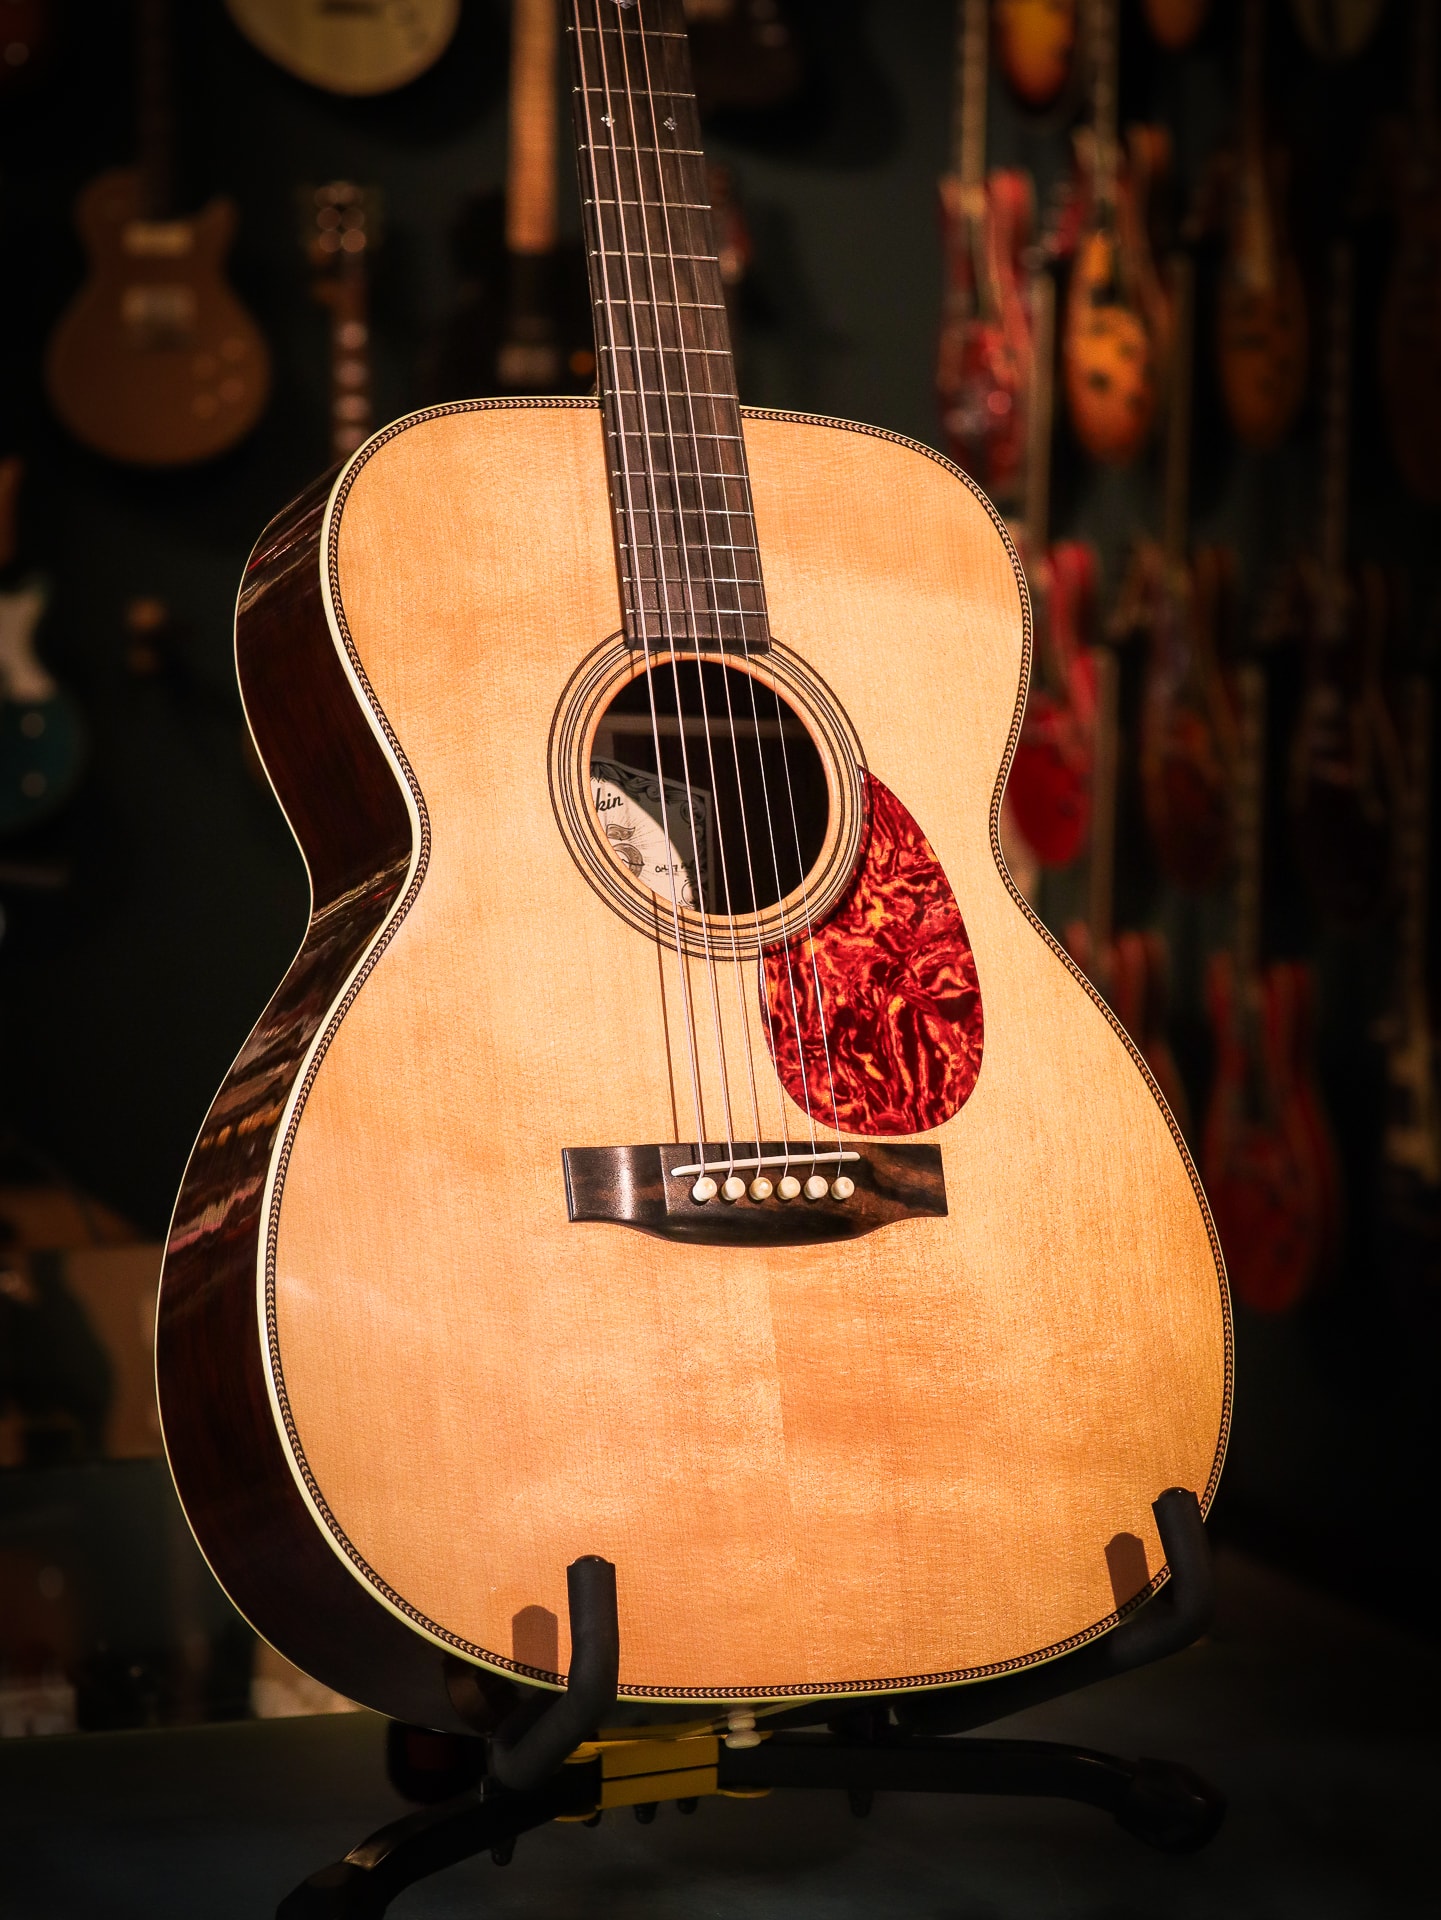 ACOUSTIC GUITARS Archives - Page 2 of 12 - Kauffmann's Guitar Store